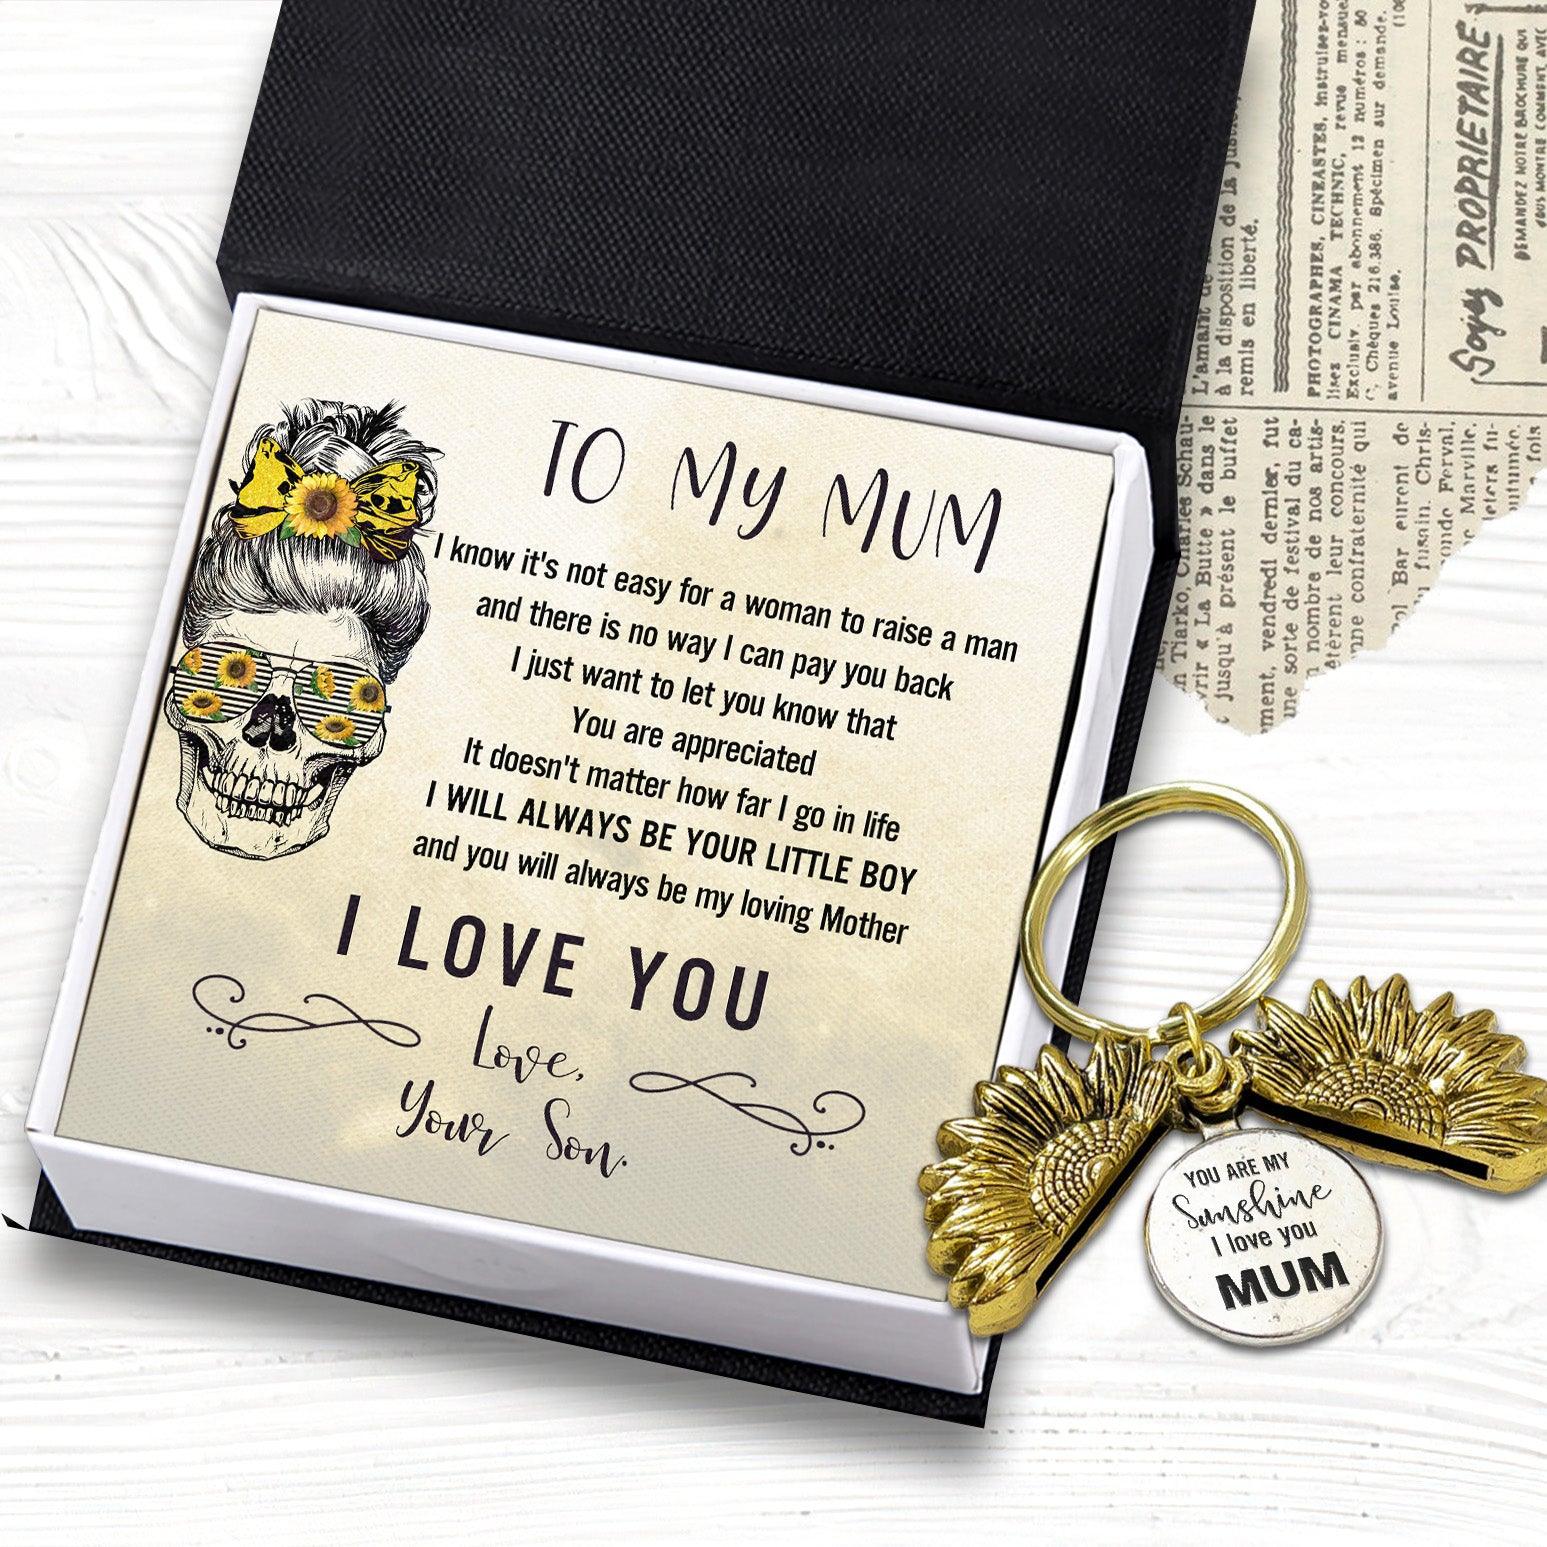 Sunflower Keychain - Skull - To My Mum - From Son - I Love You - Augkqb19004 - Gifts Holder